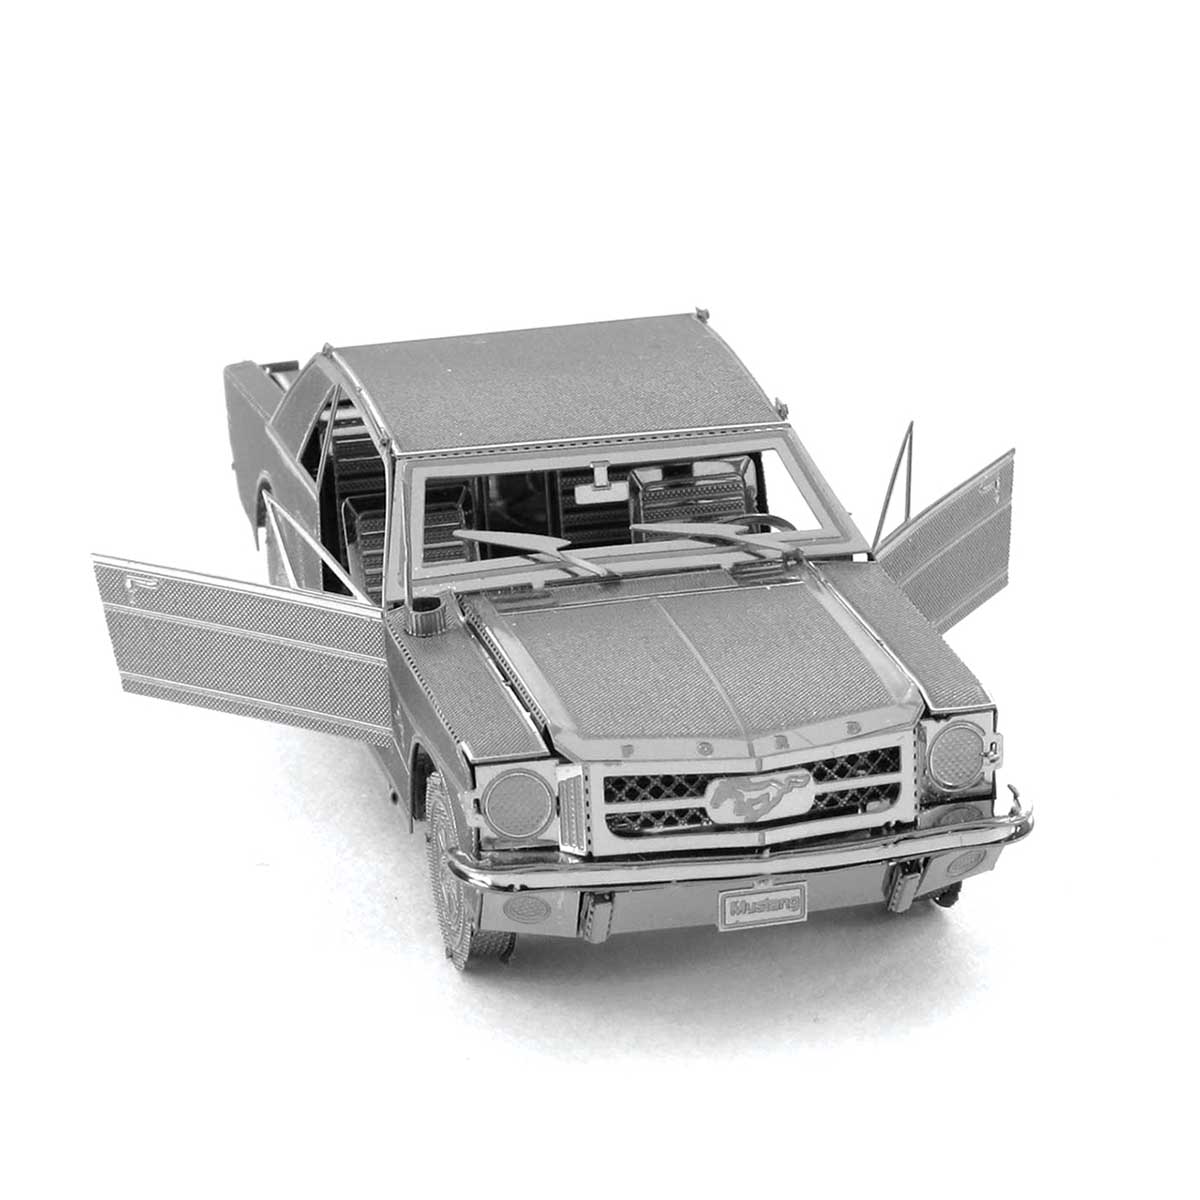 Ford 1965 Mustang Coupe Cars Metal Puzzles